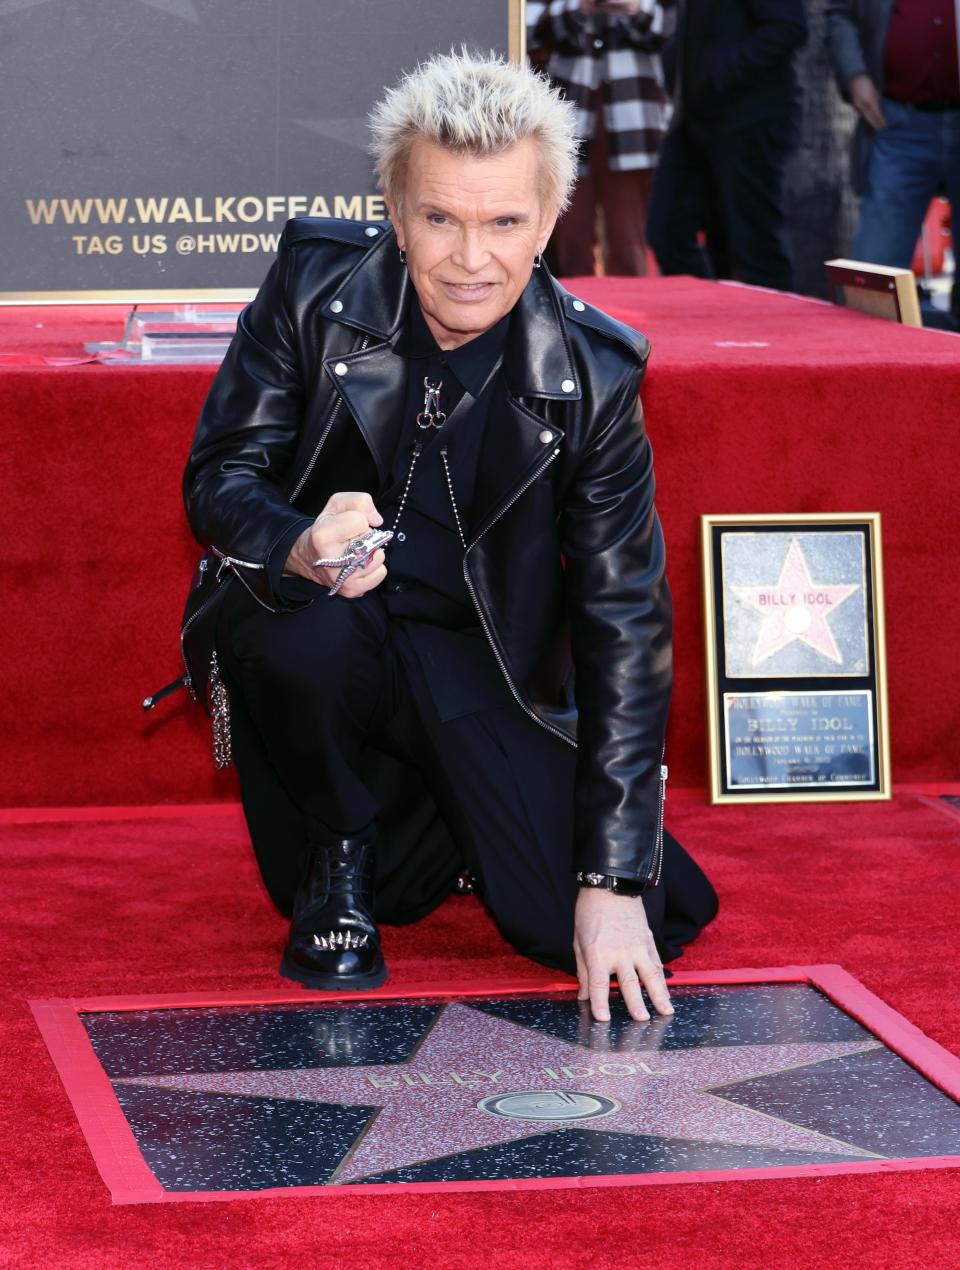 Billy Idol said he is 'California sober' after years of addiction.